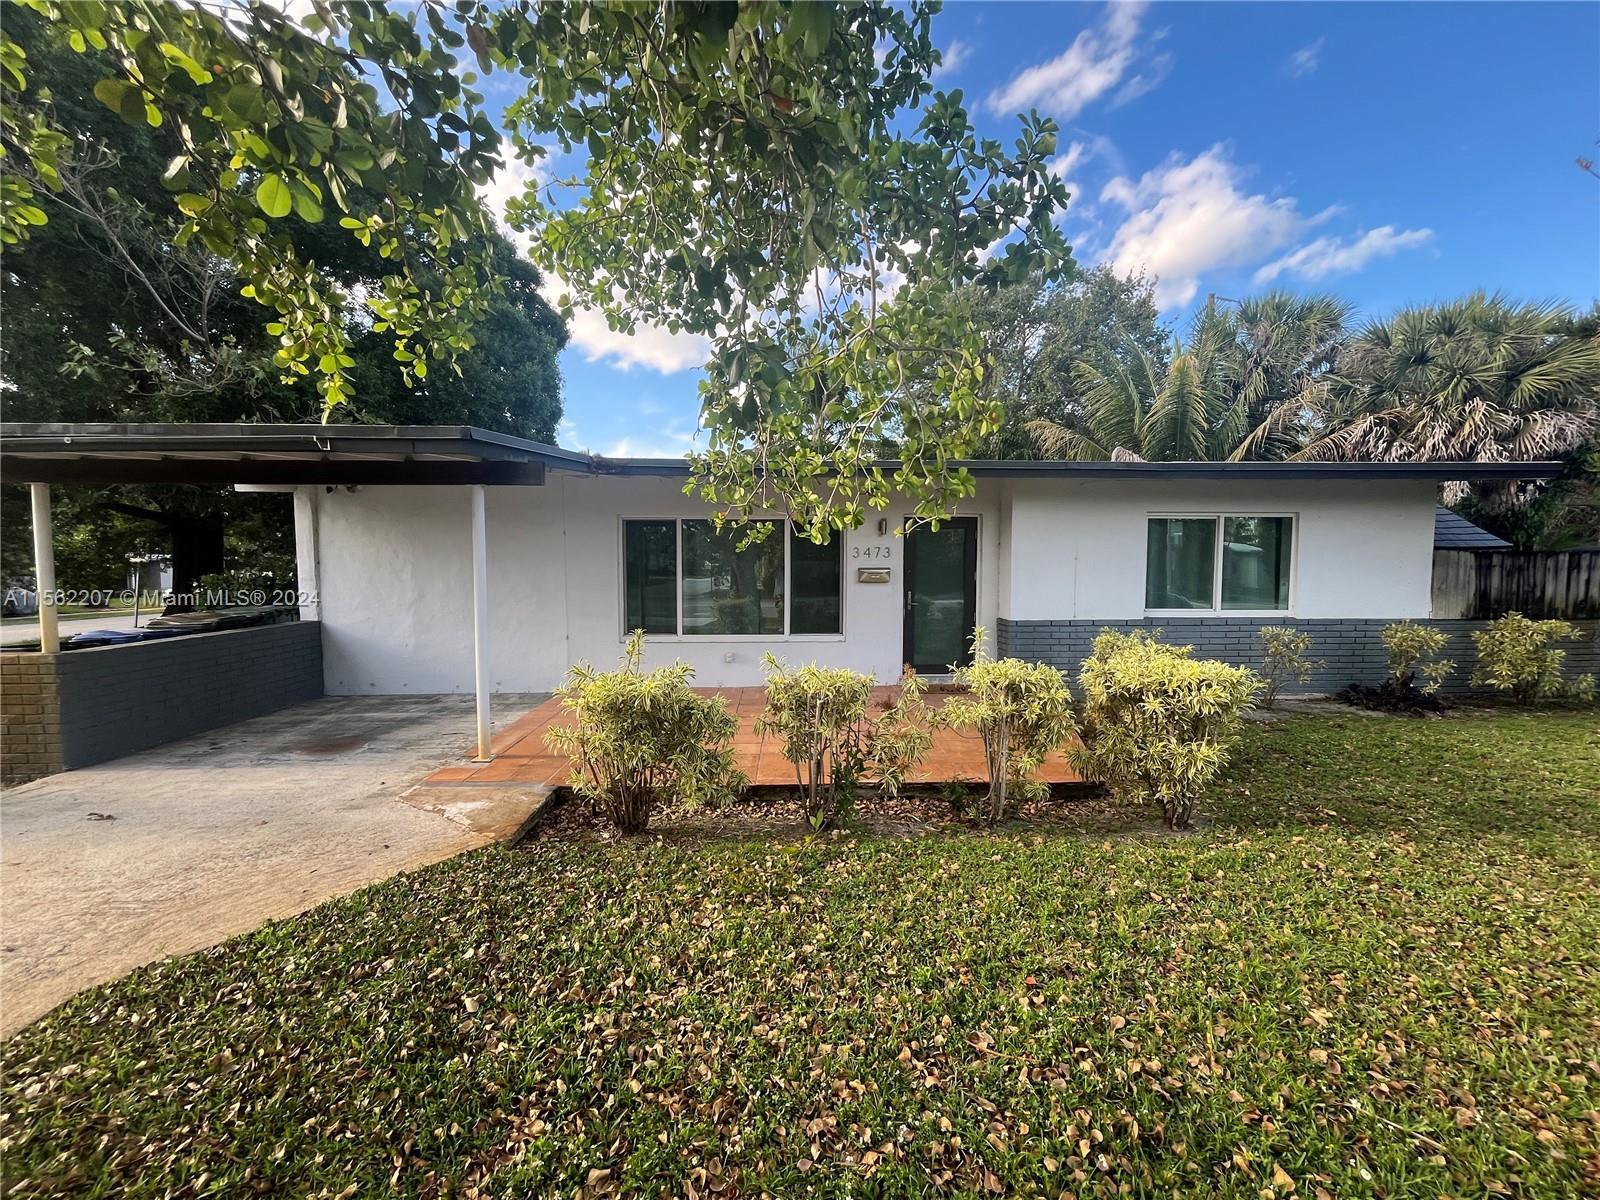 Photo of 3473 Riverland Rd in Fort Lauderdale, FL